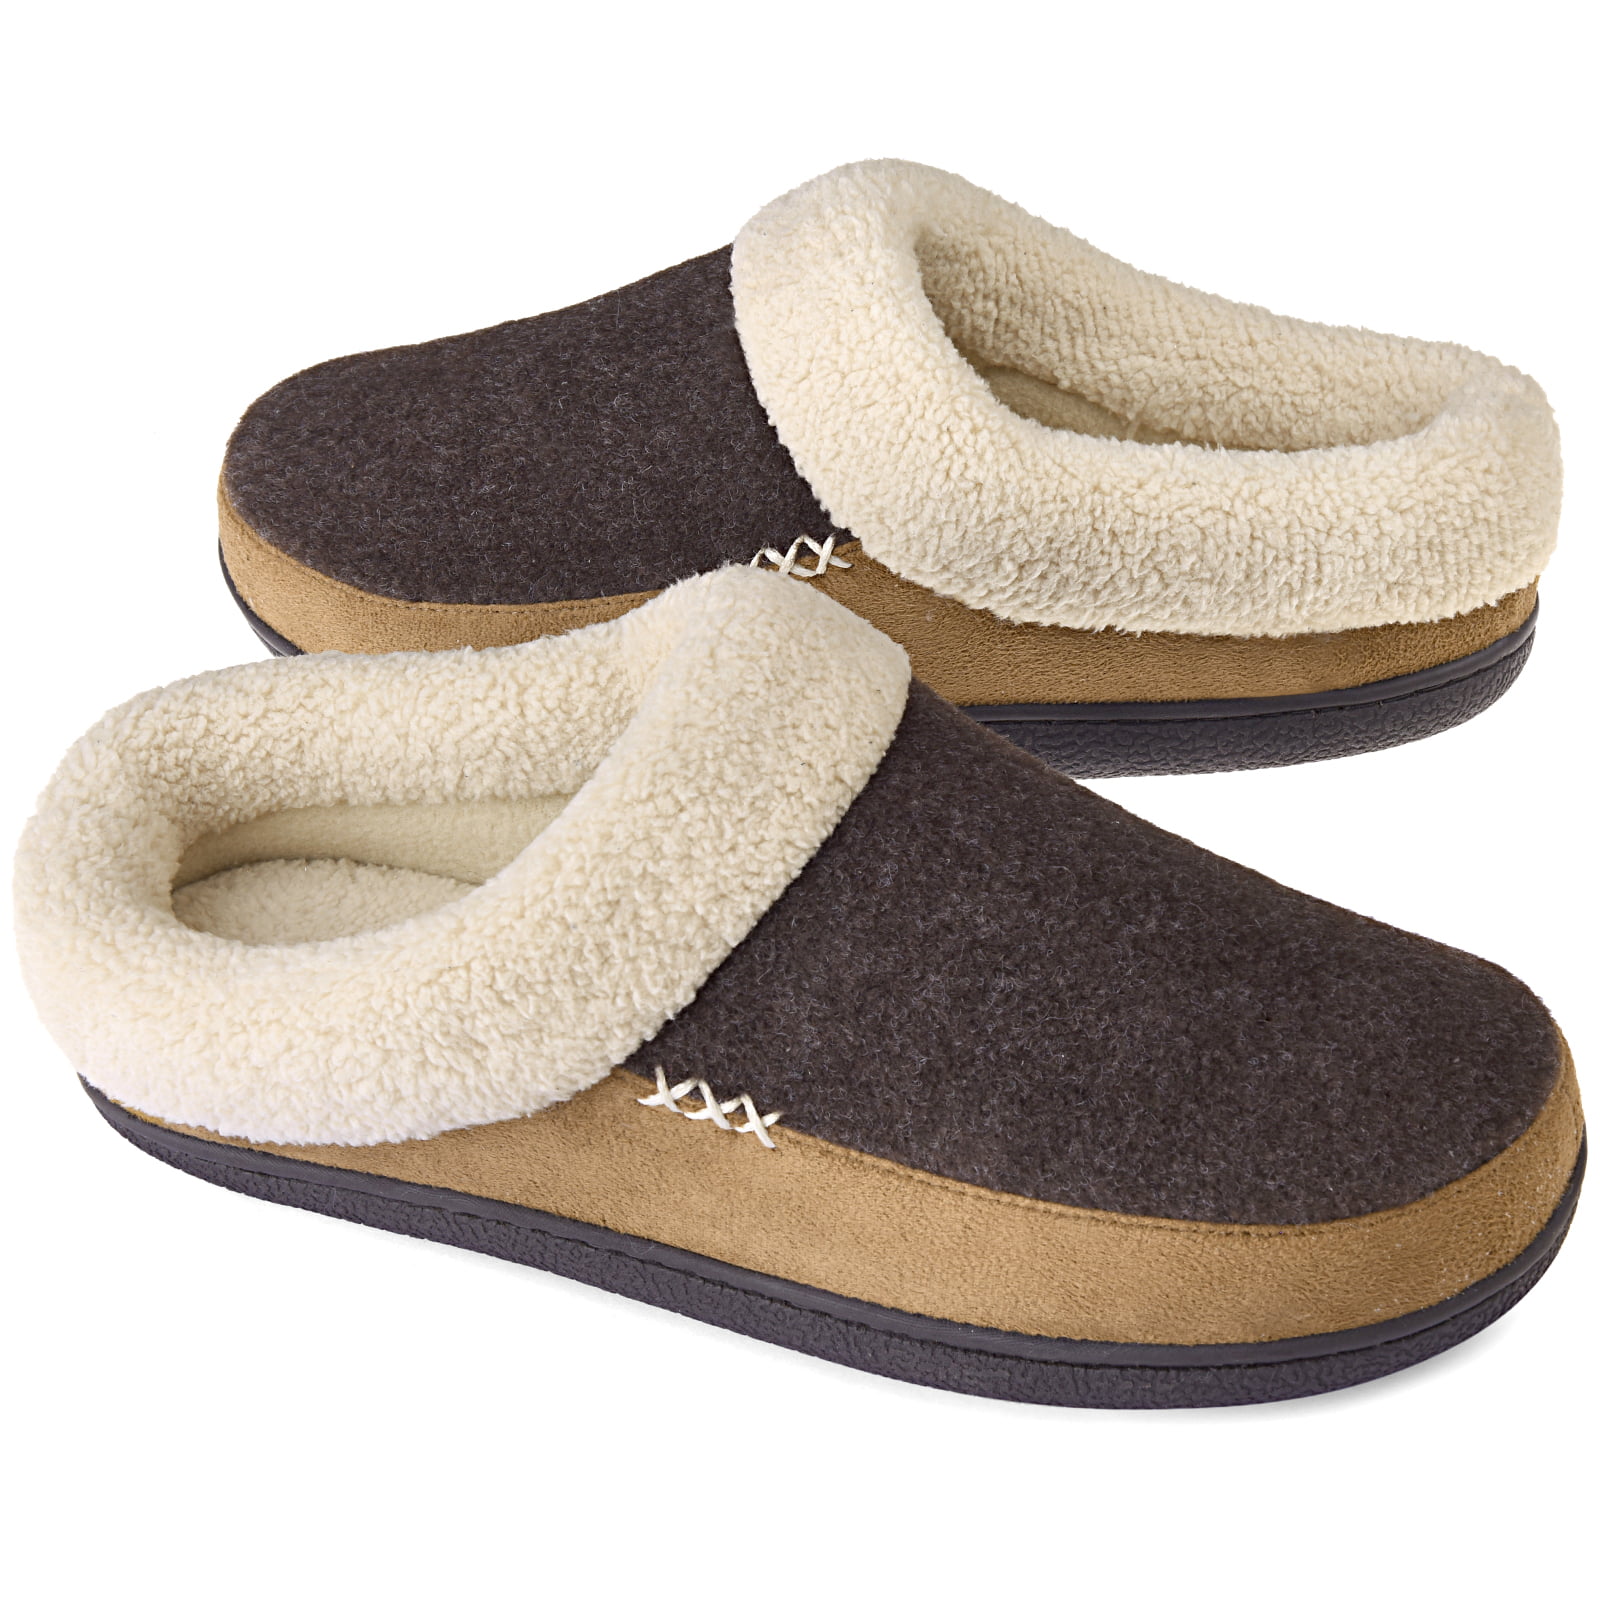 Vonmay - VONMAY Men's Slippers Fuzzy House Shoes Memory Foam Slip On ...